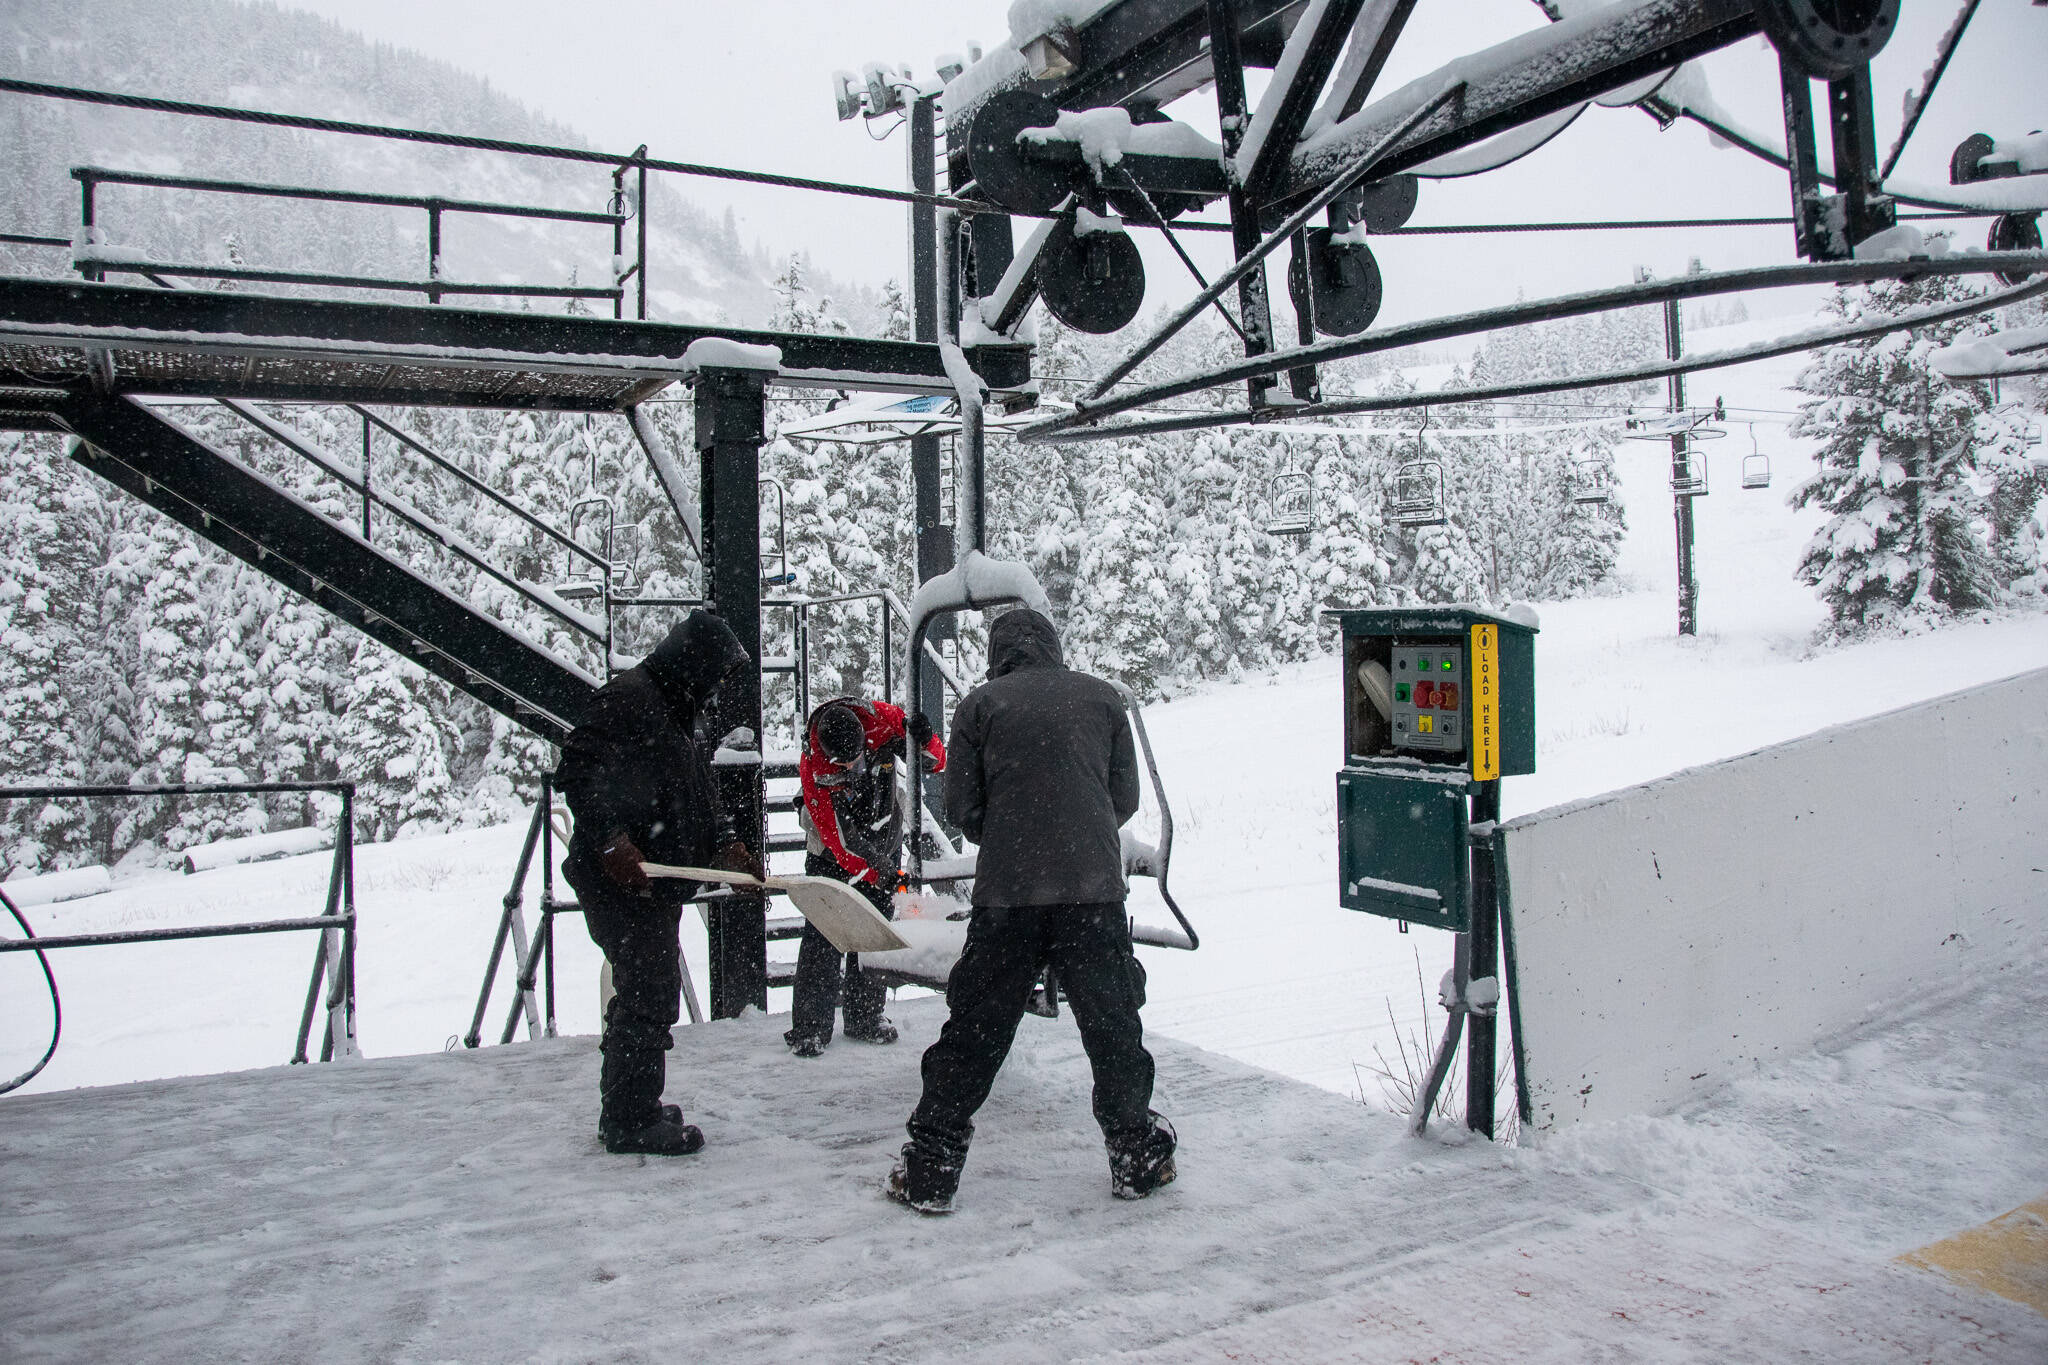 Eaglecrest Ski Area employees clear snow from a lift chair on Sunday, when conditions for opening by this weekend seemed promising. But warmer and wet weather this week means the bottom of the mountain is still not ready for operation, although Eaglecrest Grill will be open this weekend for people wanting to access snow on the upper part of the mountain on their own. (Photo courtesy of Eaglecrest Ski Area.)